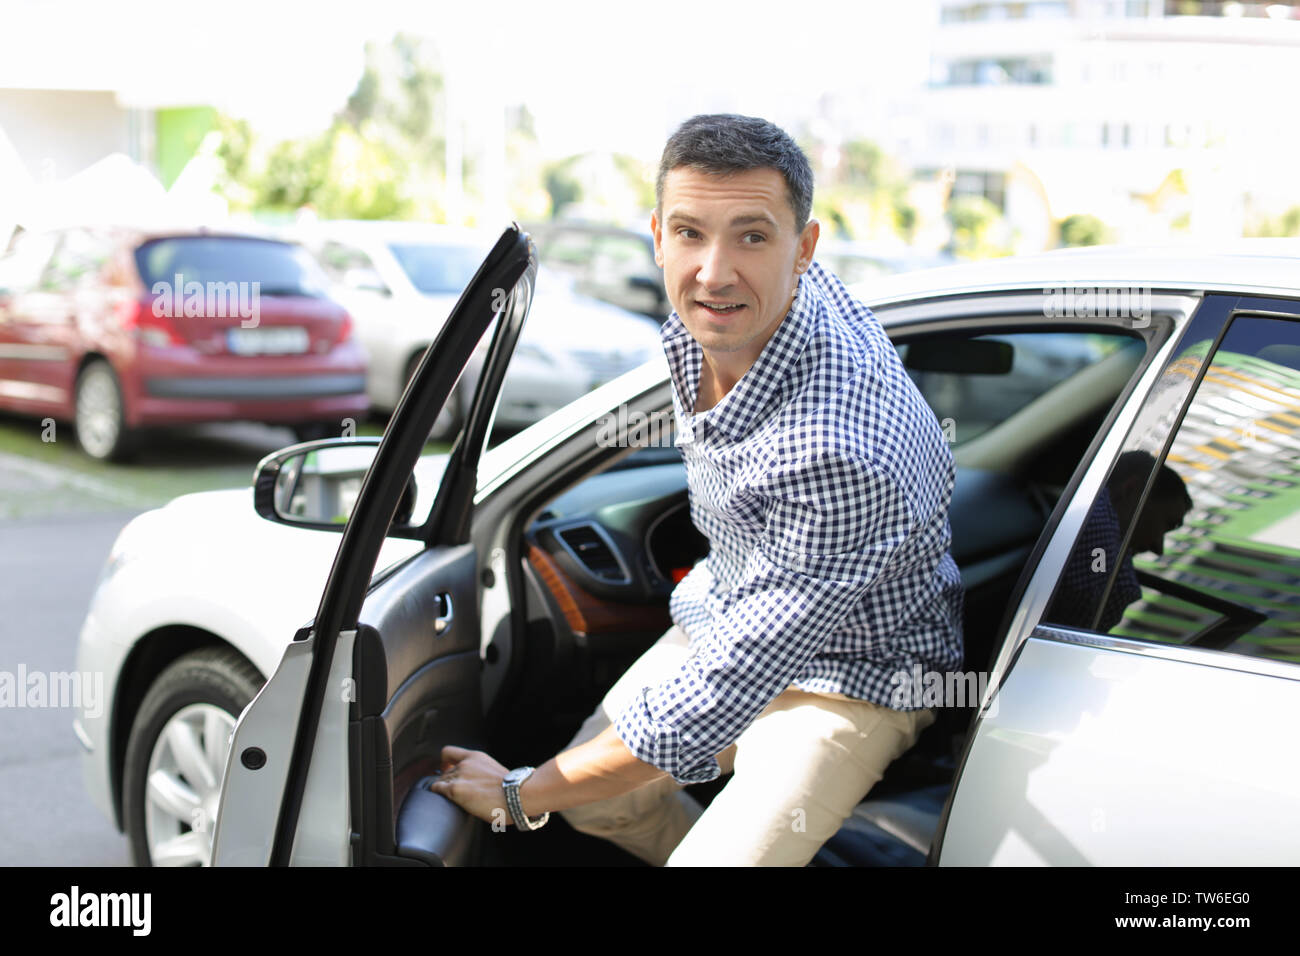 Man getting out of car Stock Photo